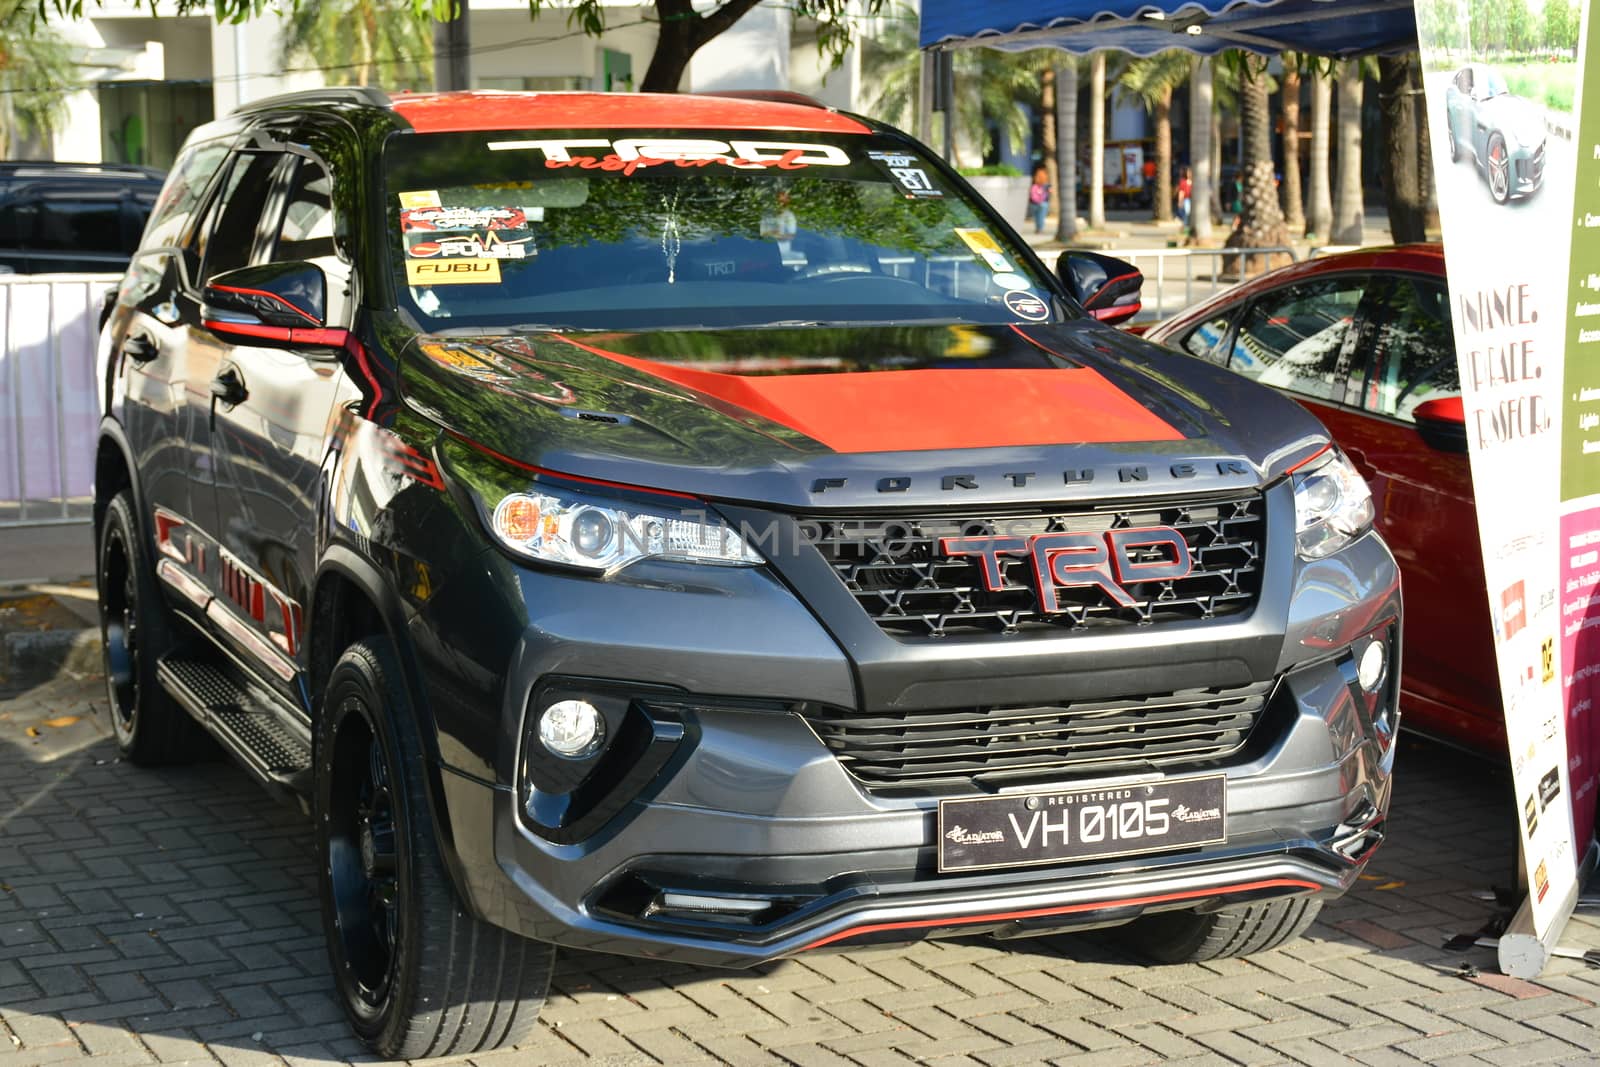 Toyota fortuner suv at Bumper to Bumper car show in Pasay, Phili by imwaltersy